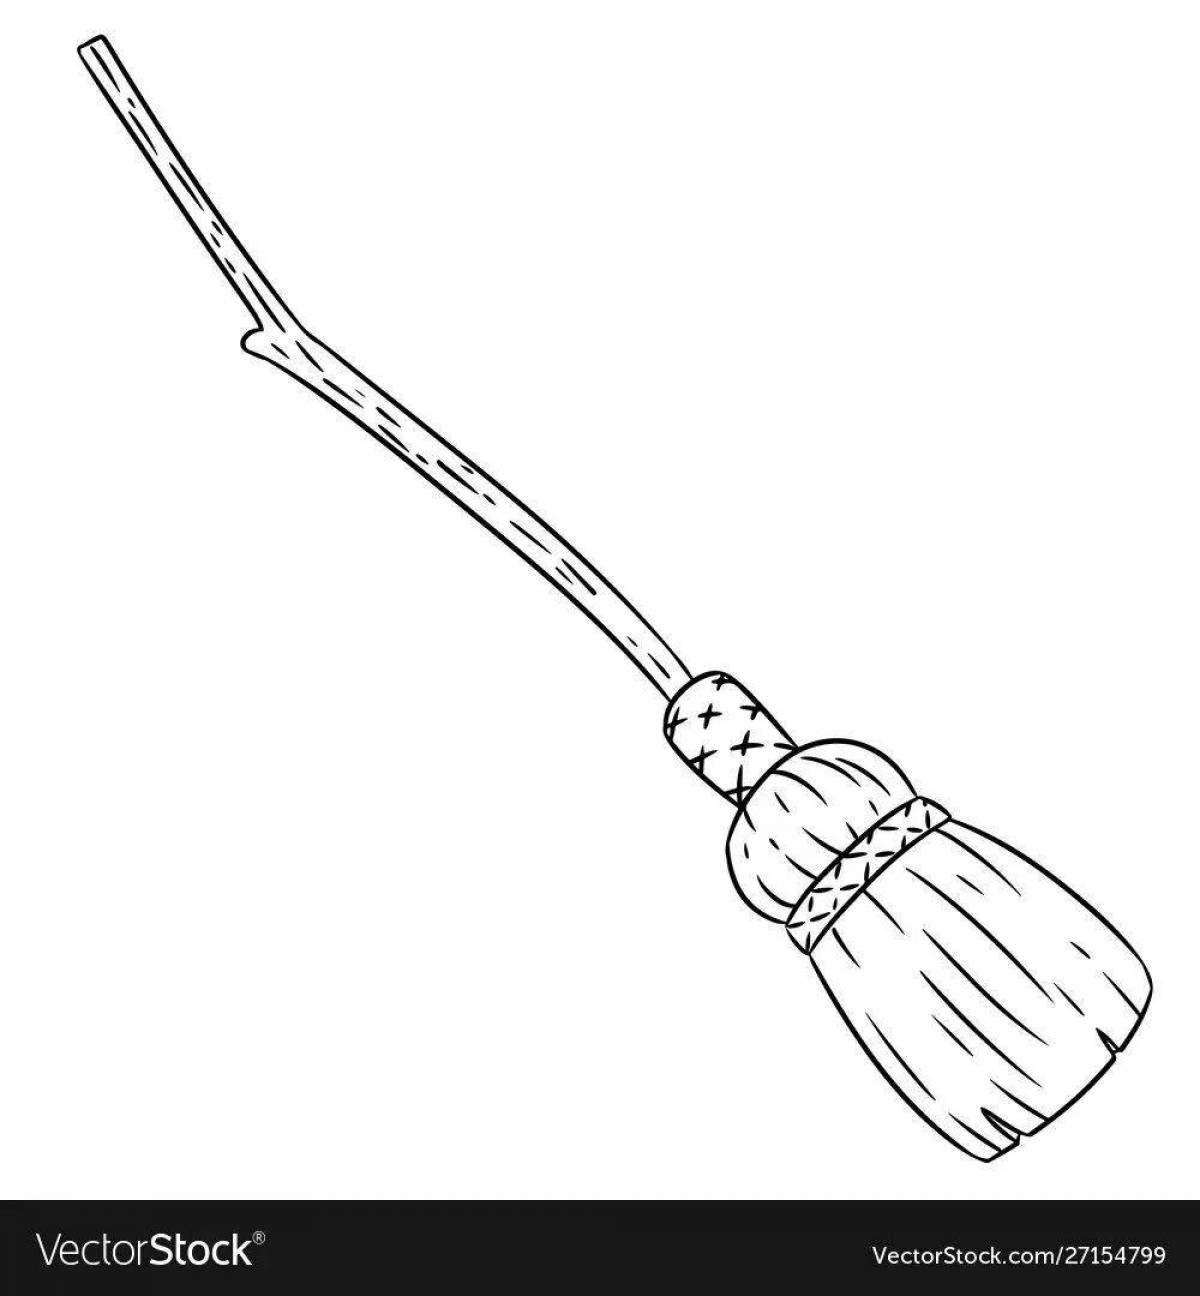 Adorable broom coloring page for kids